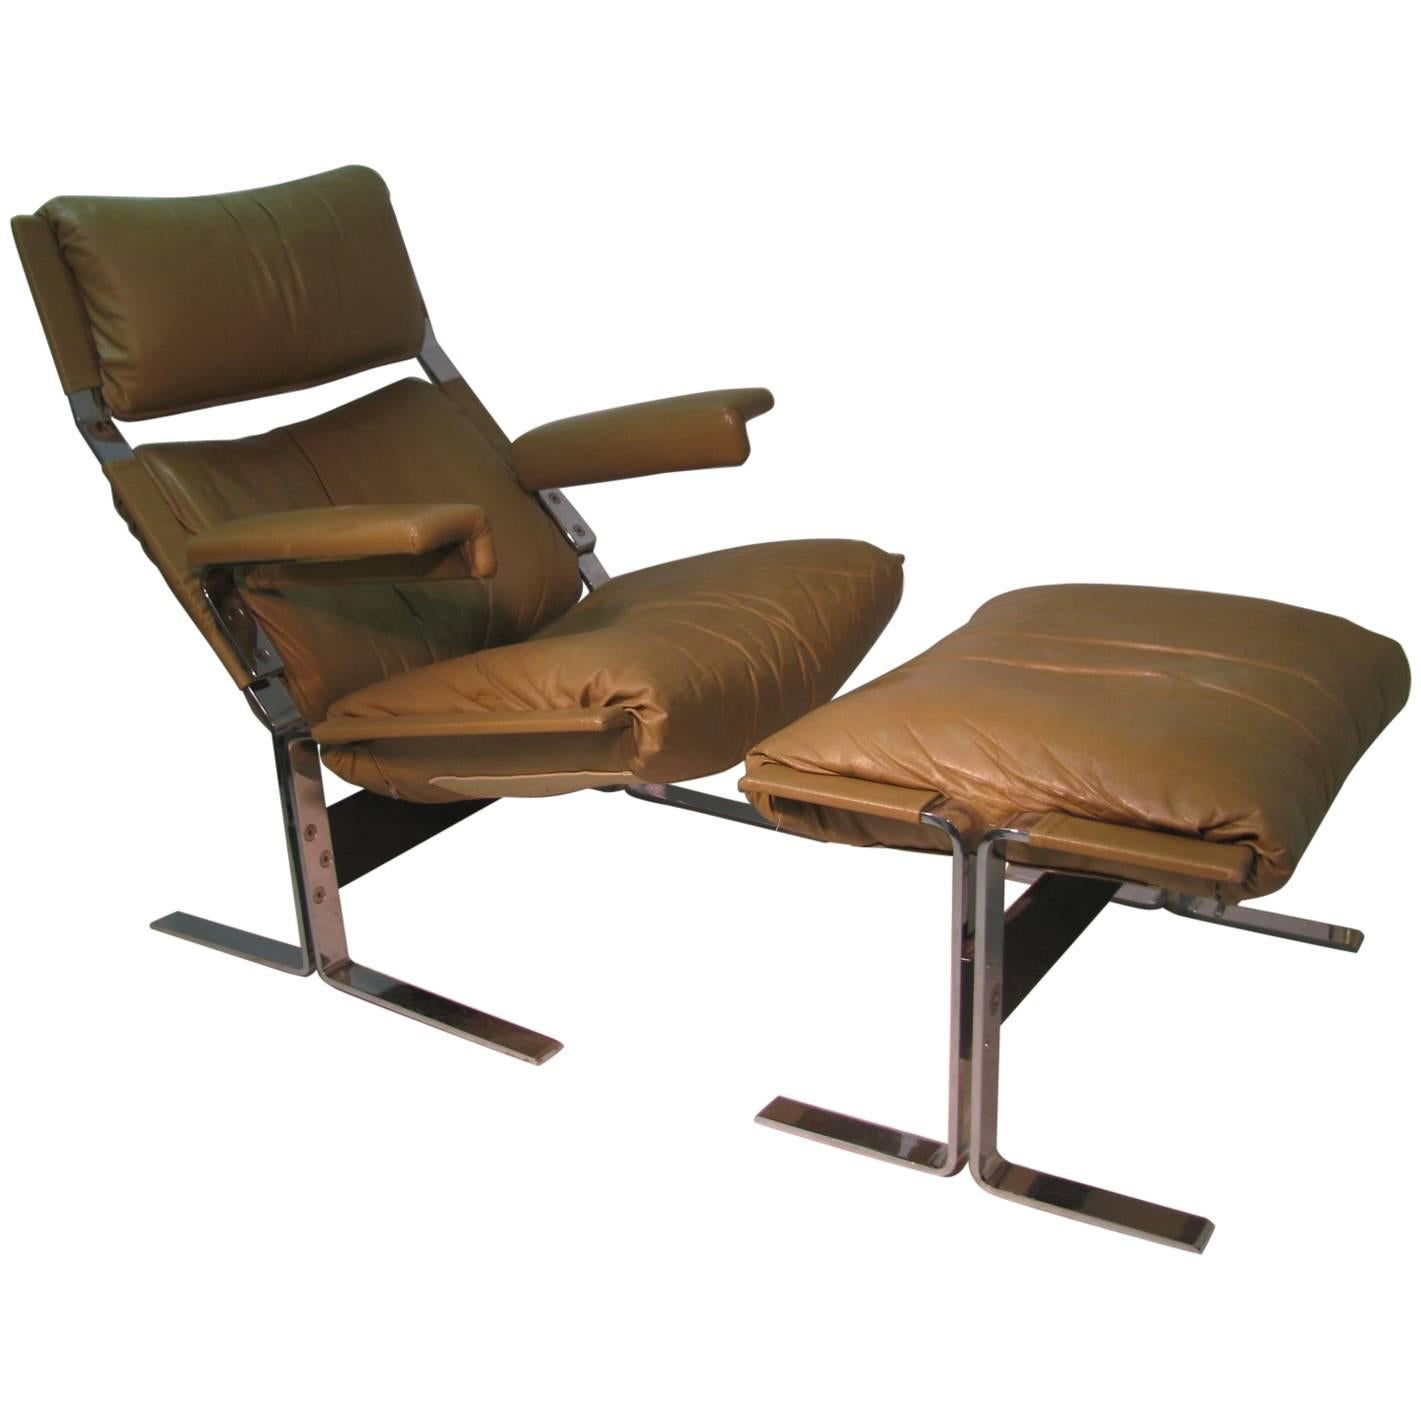 Mid-Century Modern Leather Lounge Chair with Ottoman by Richard Hersberger